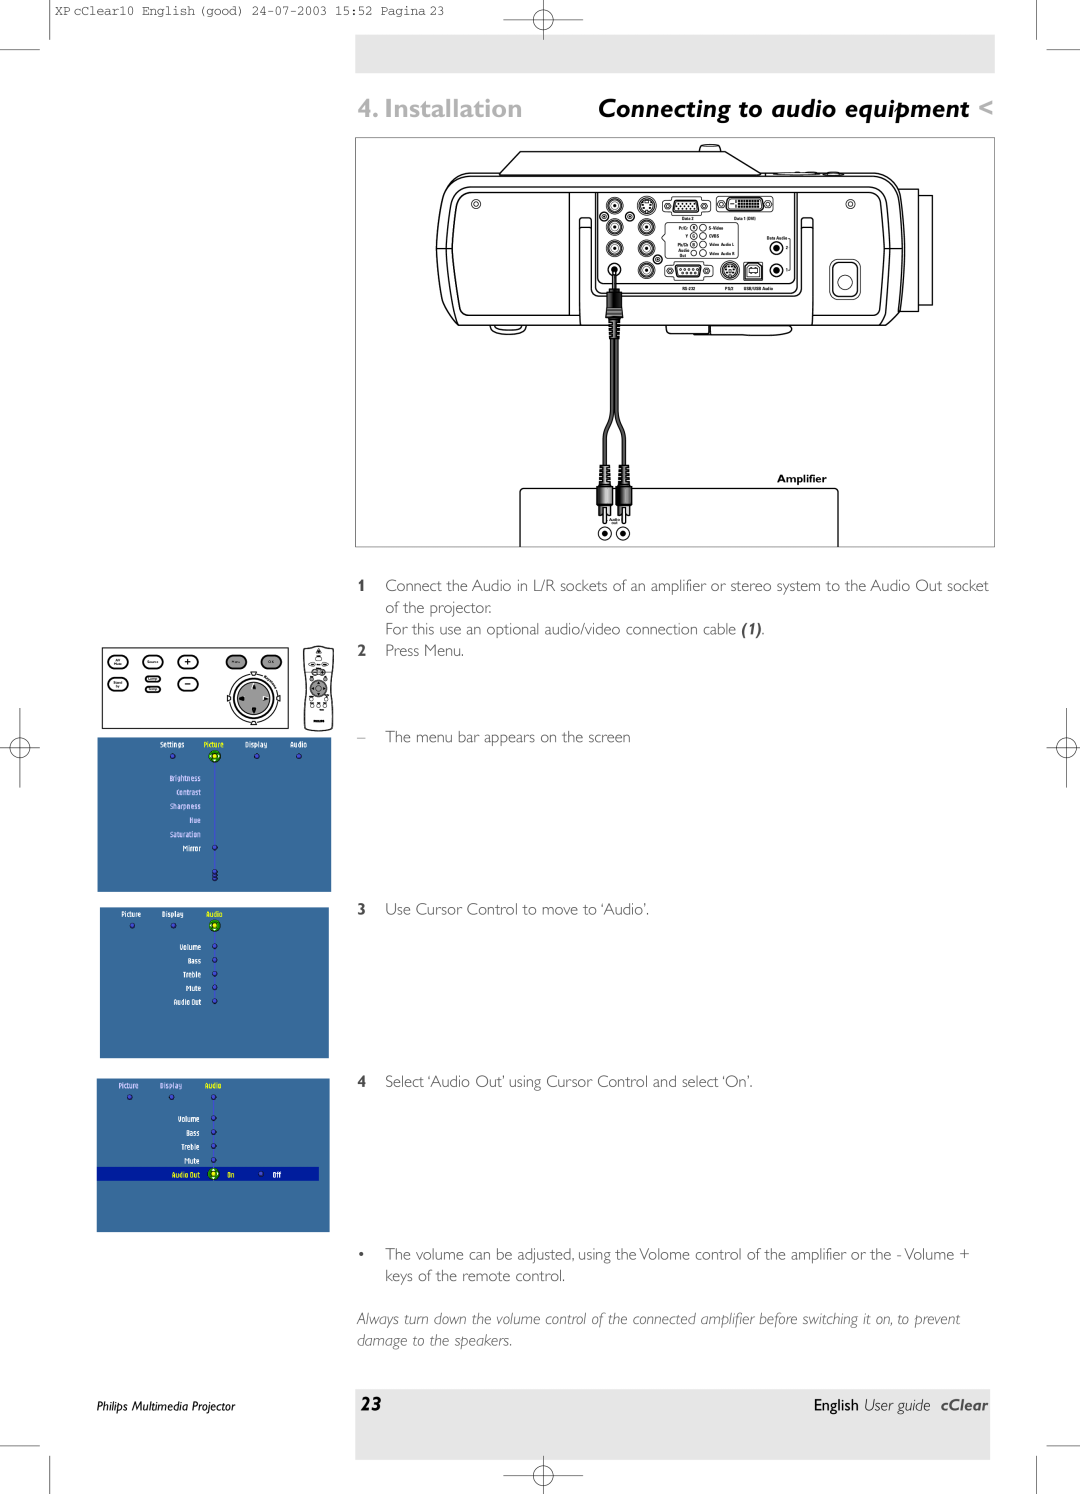 Philips bSure 1 manual Installation Connecting to audio equipment 